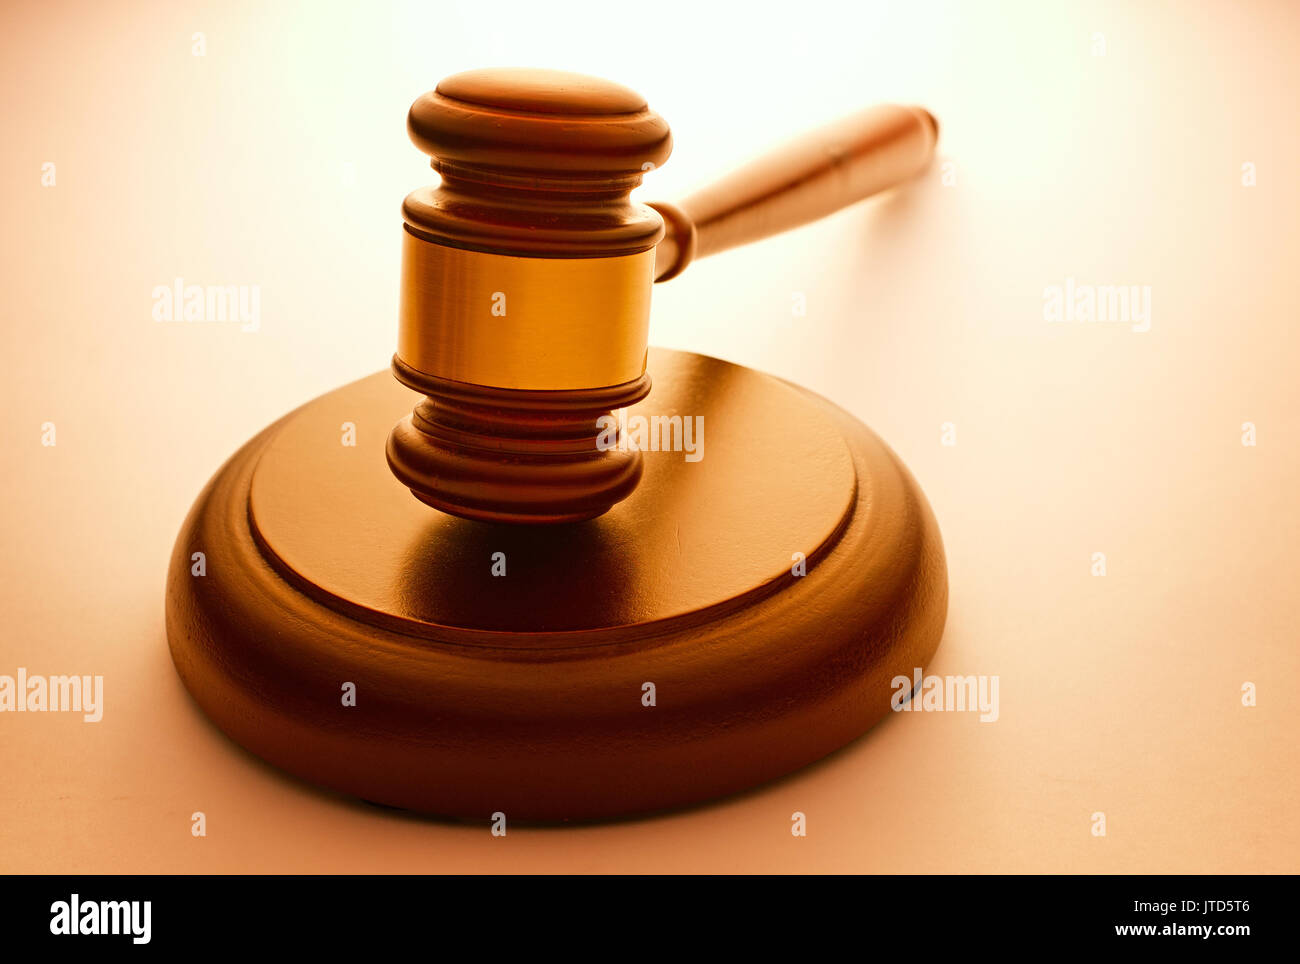 Wooden gavel with a brass band resting on a plinth used by a judge or auctioneer and conceptual of justice and judgements with backlit highlight and c Stock Photo